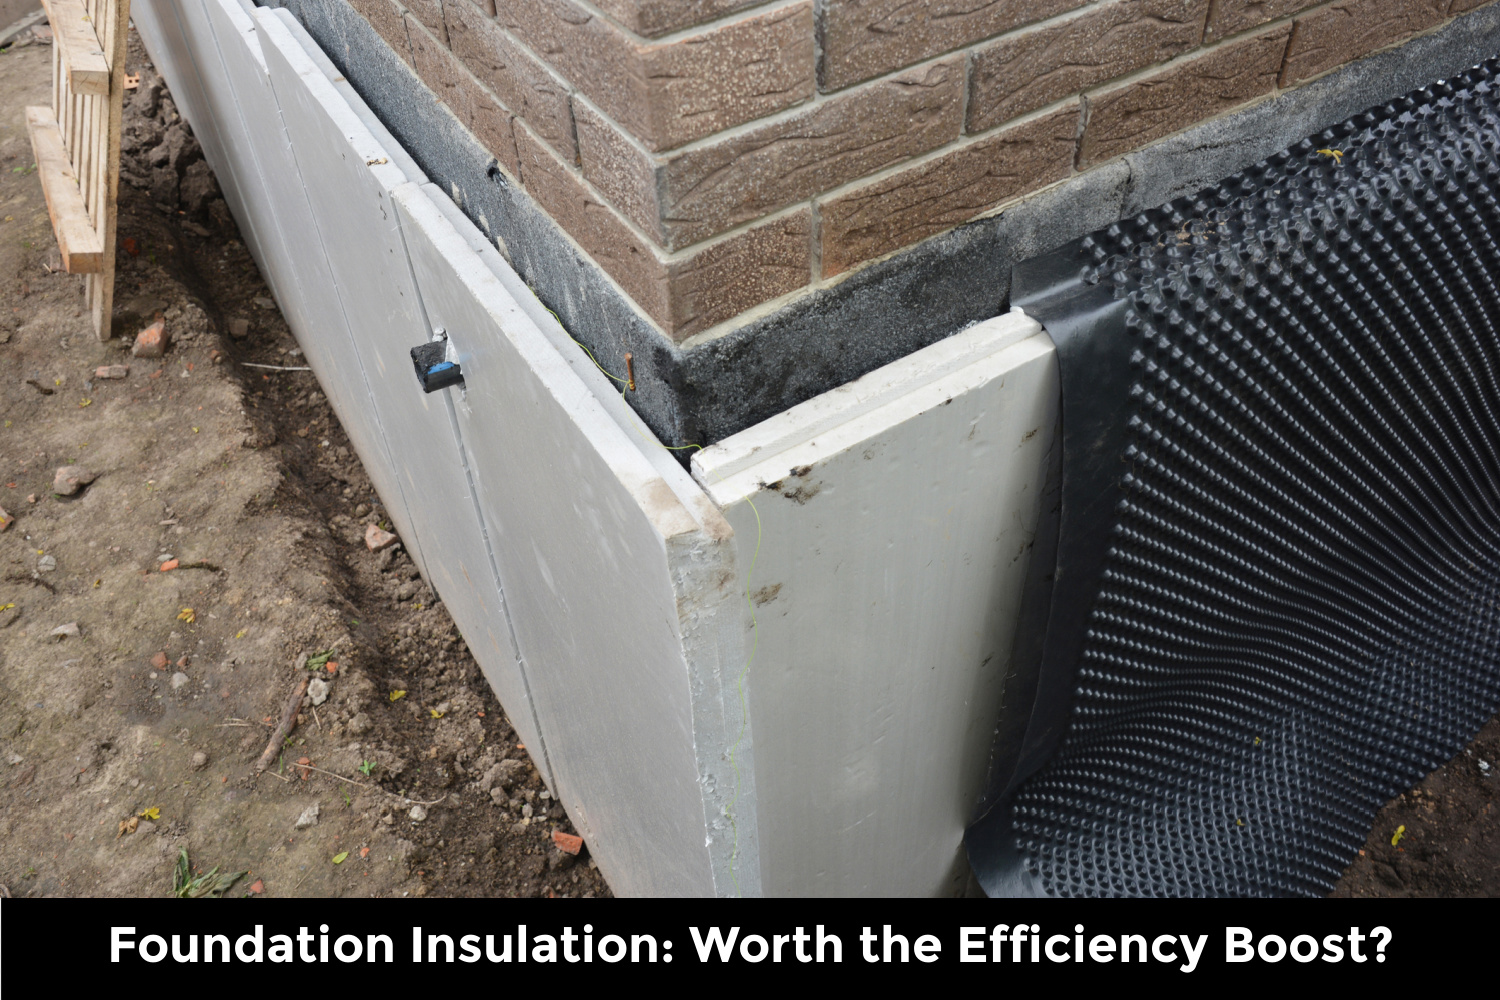 Foundation Insulation: Worth the Efficiency Boost?